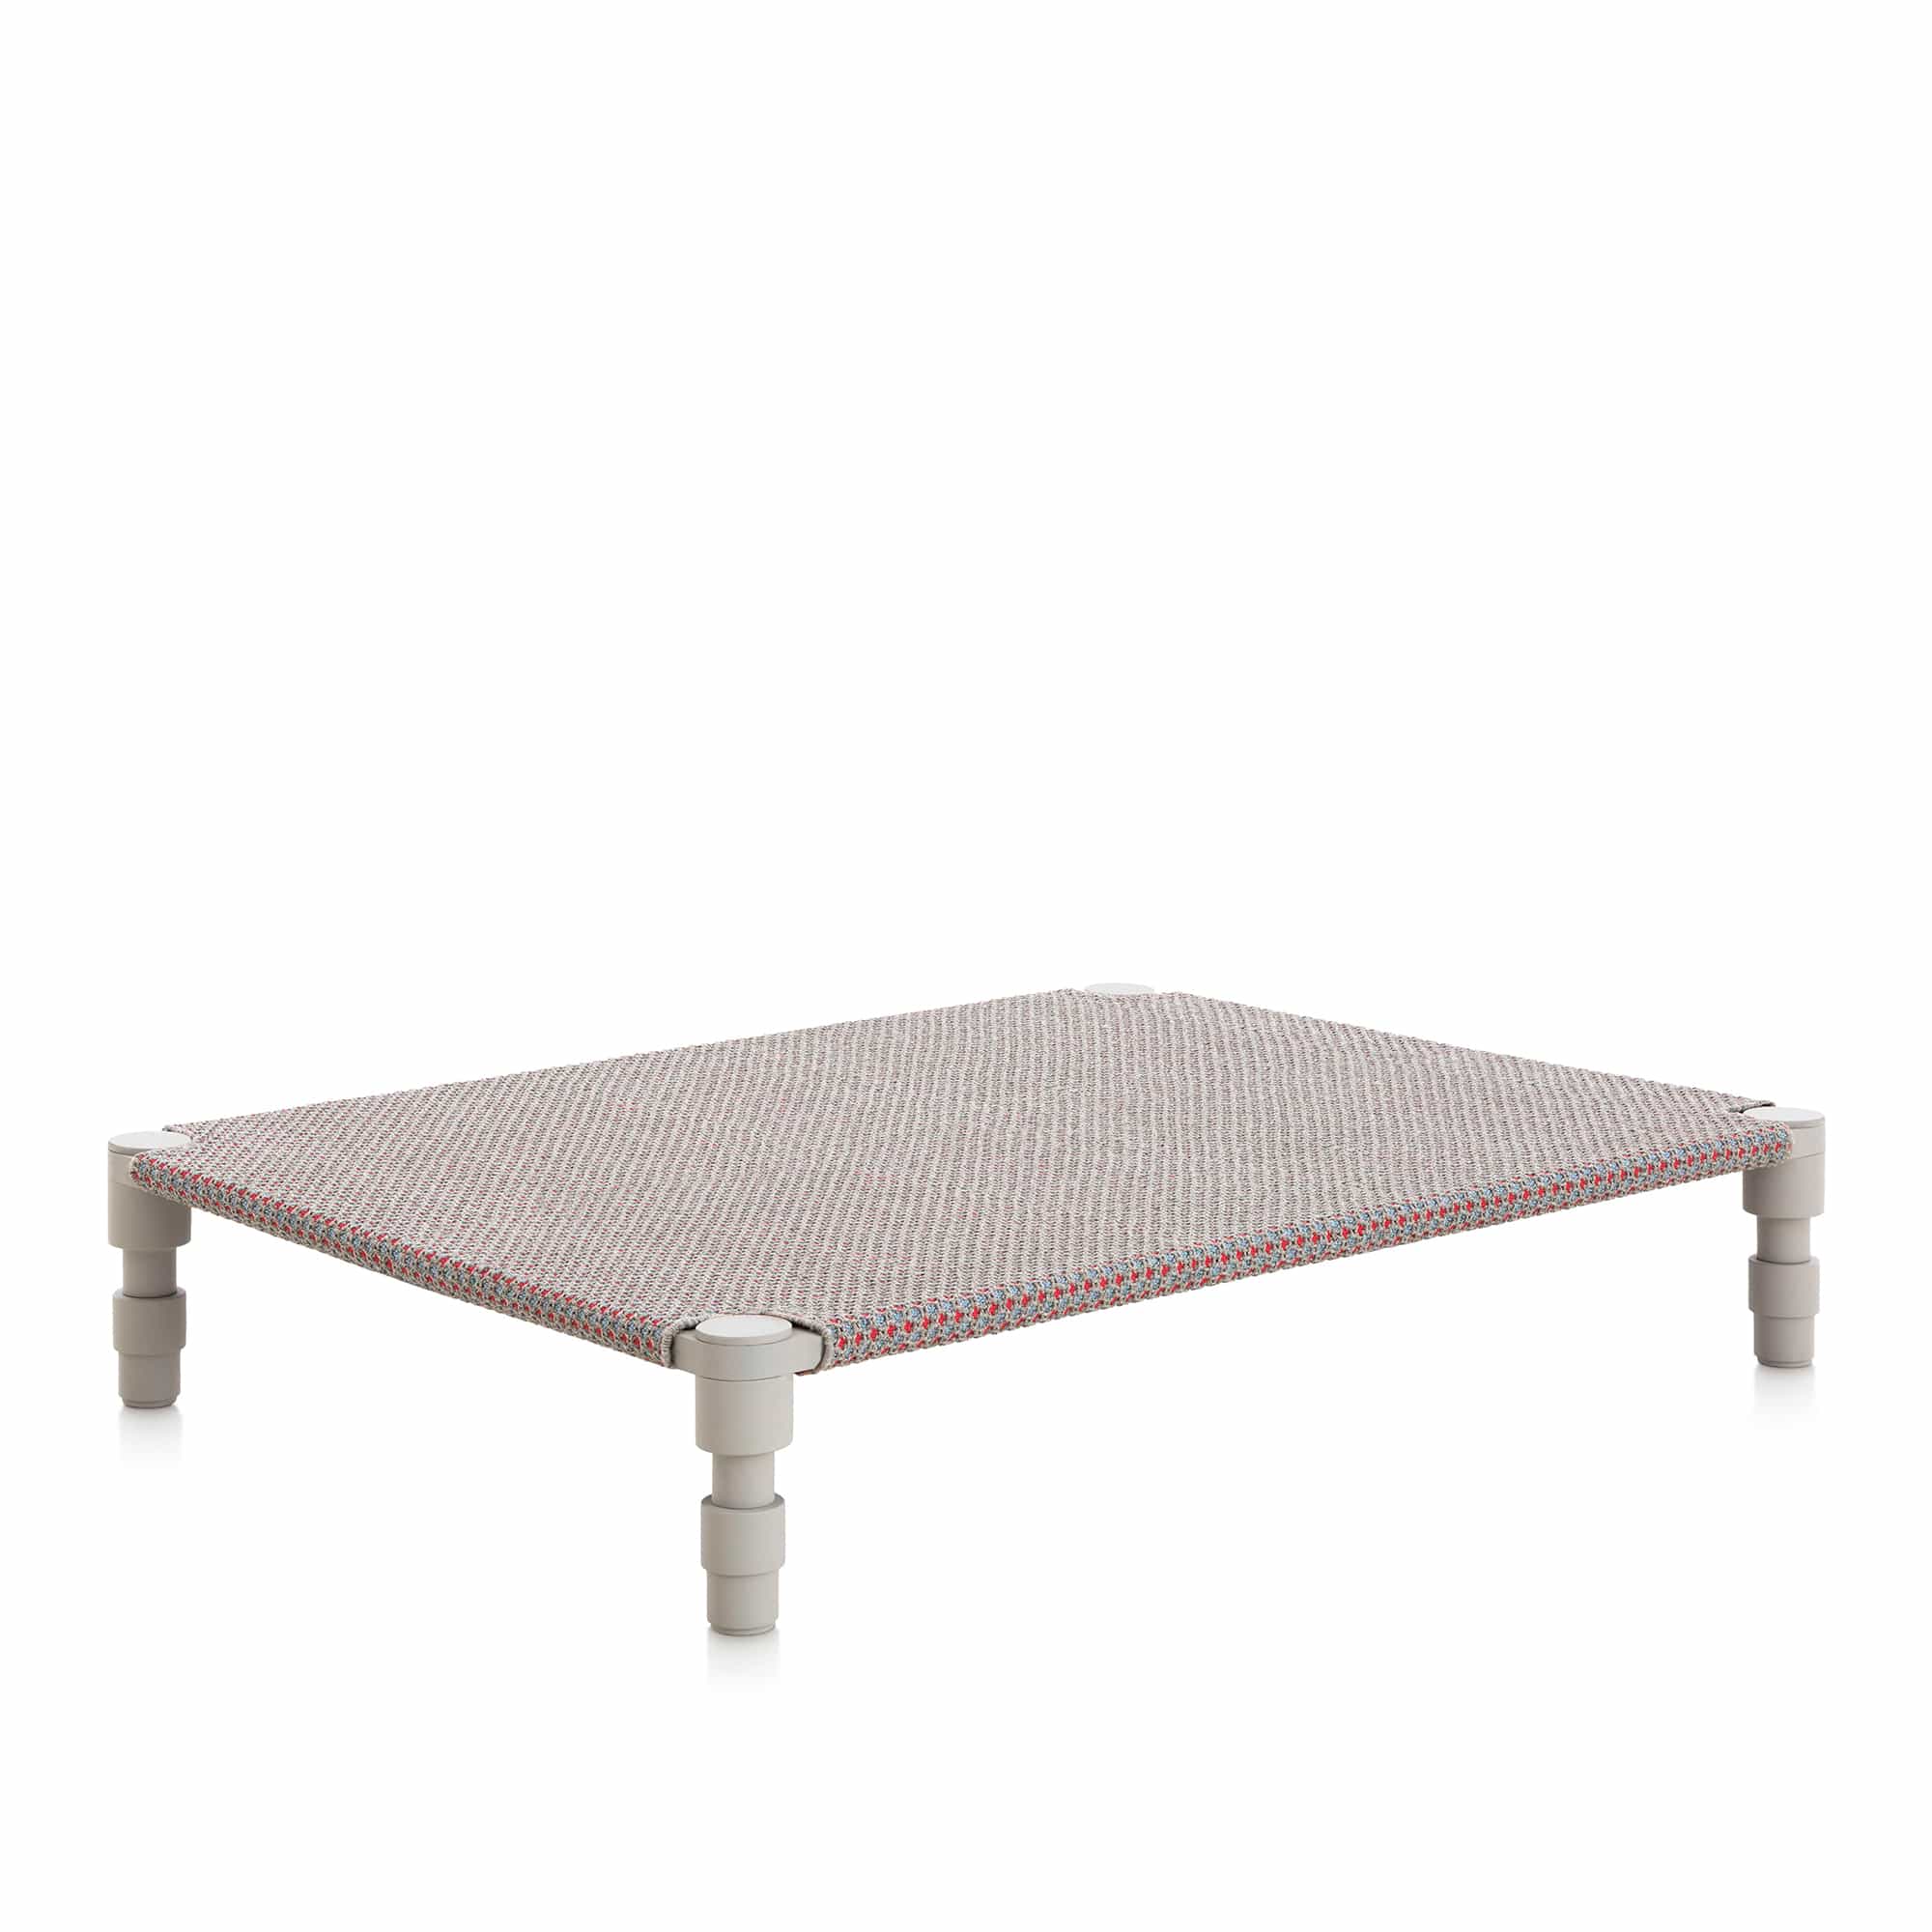 Garden Layers Double Indian Bed - Gofre Blue